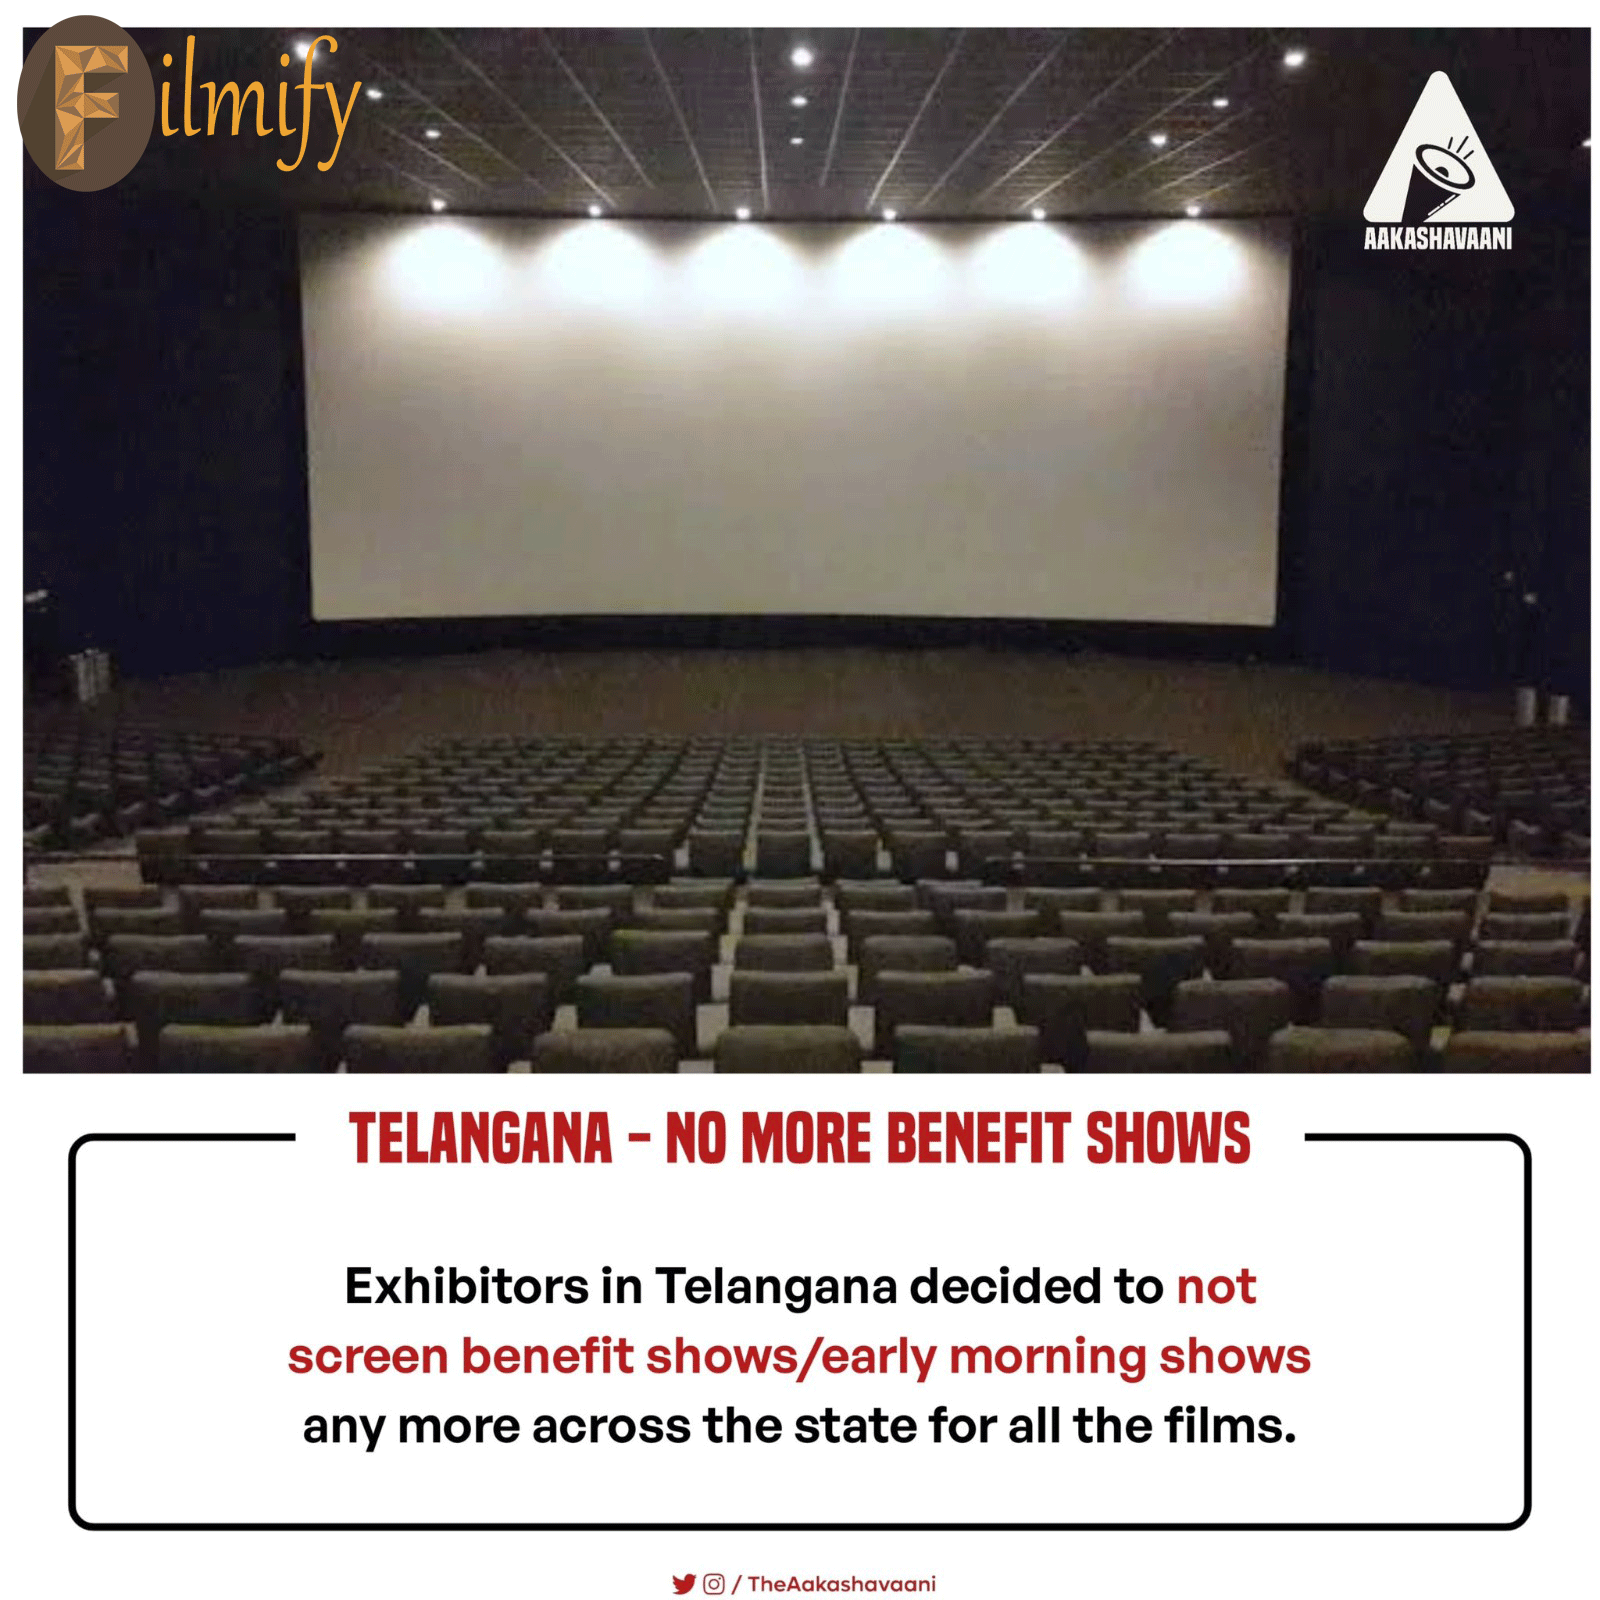 Shocking news for movie lovers... No more early morning shows